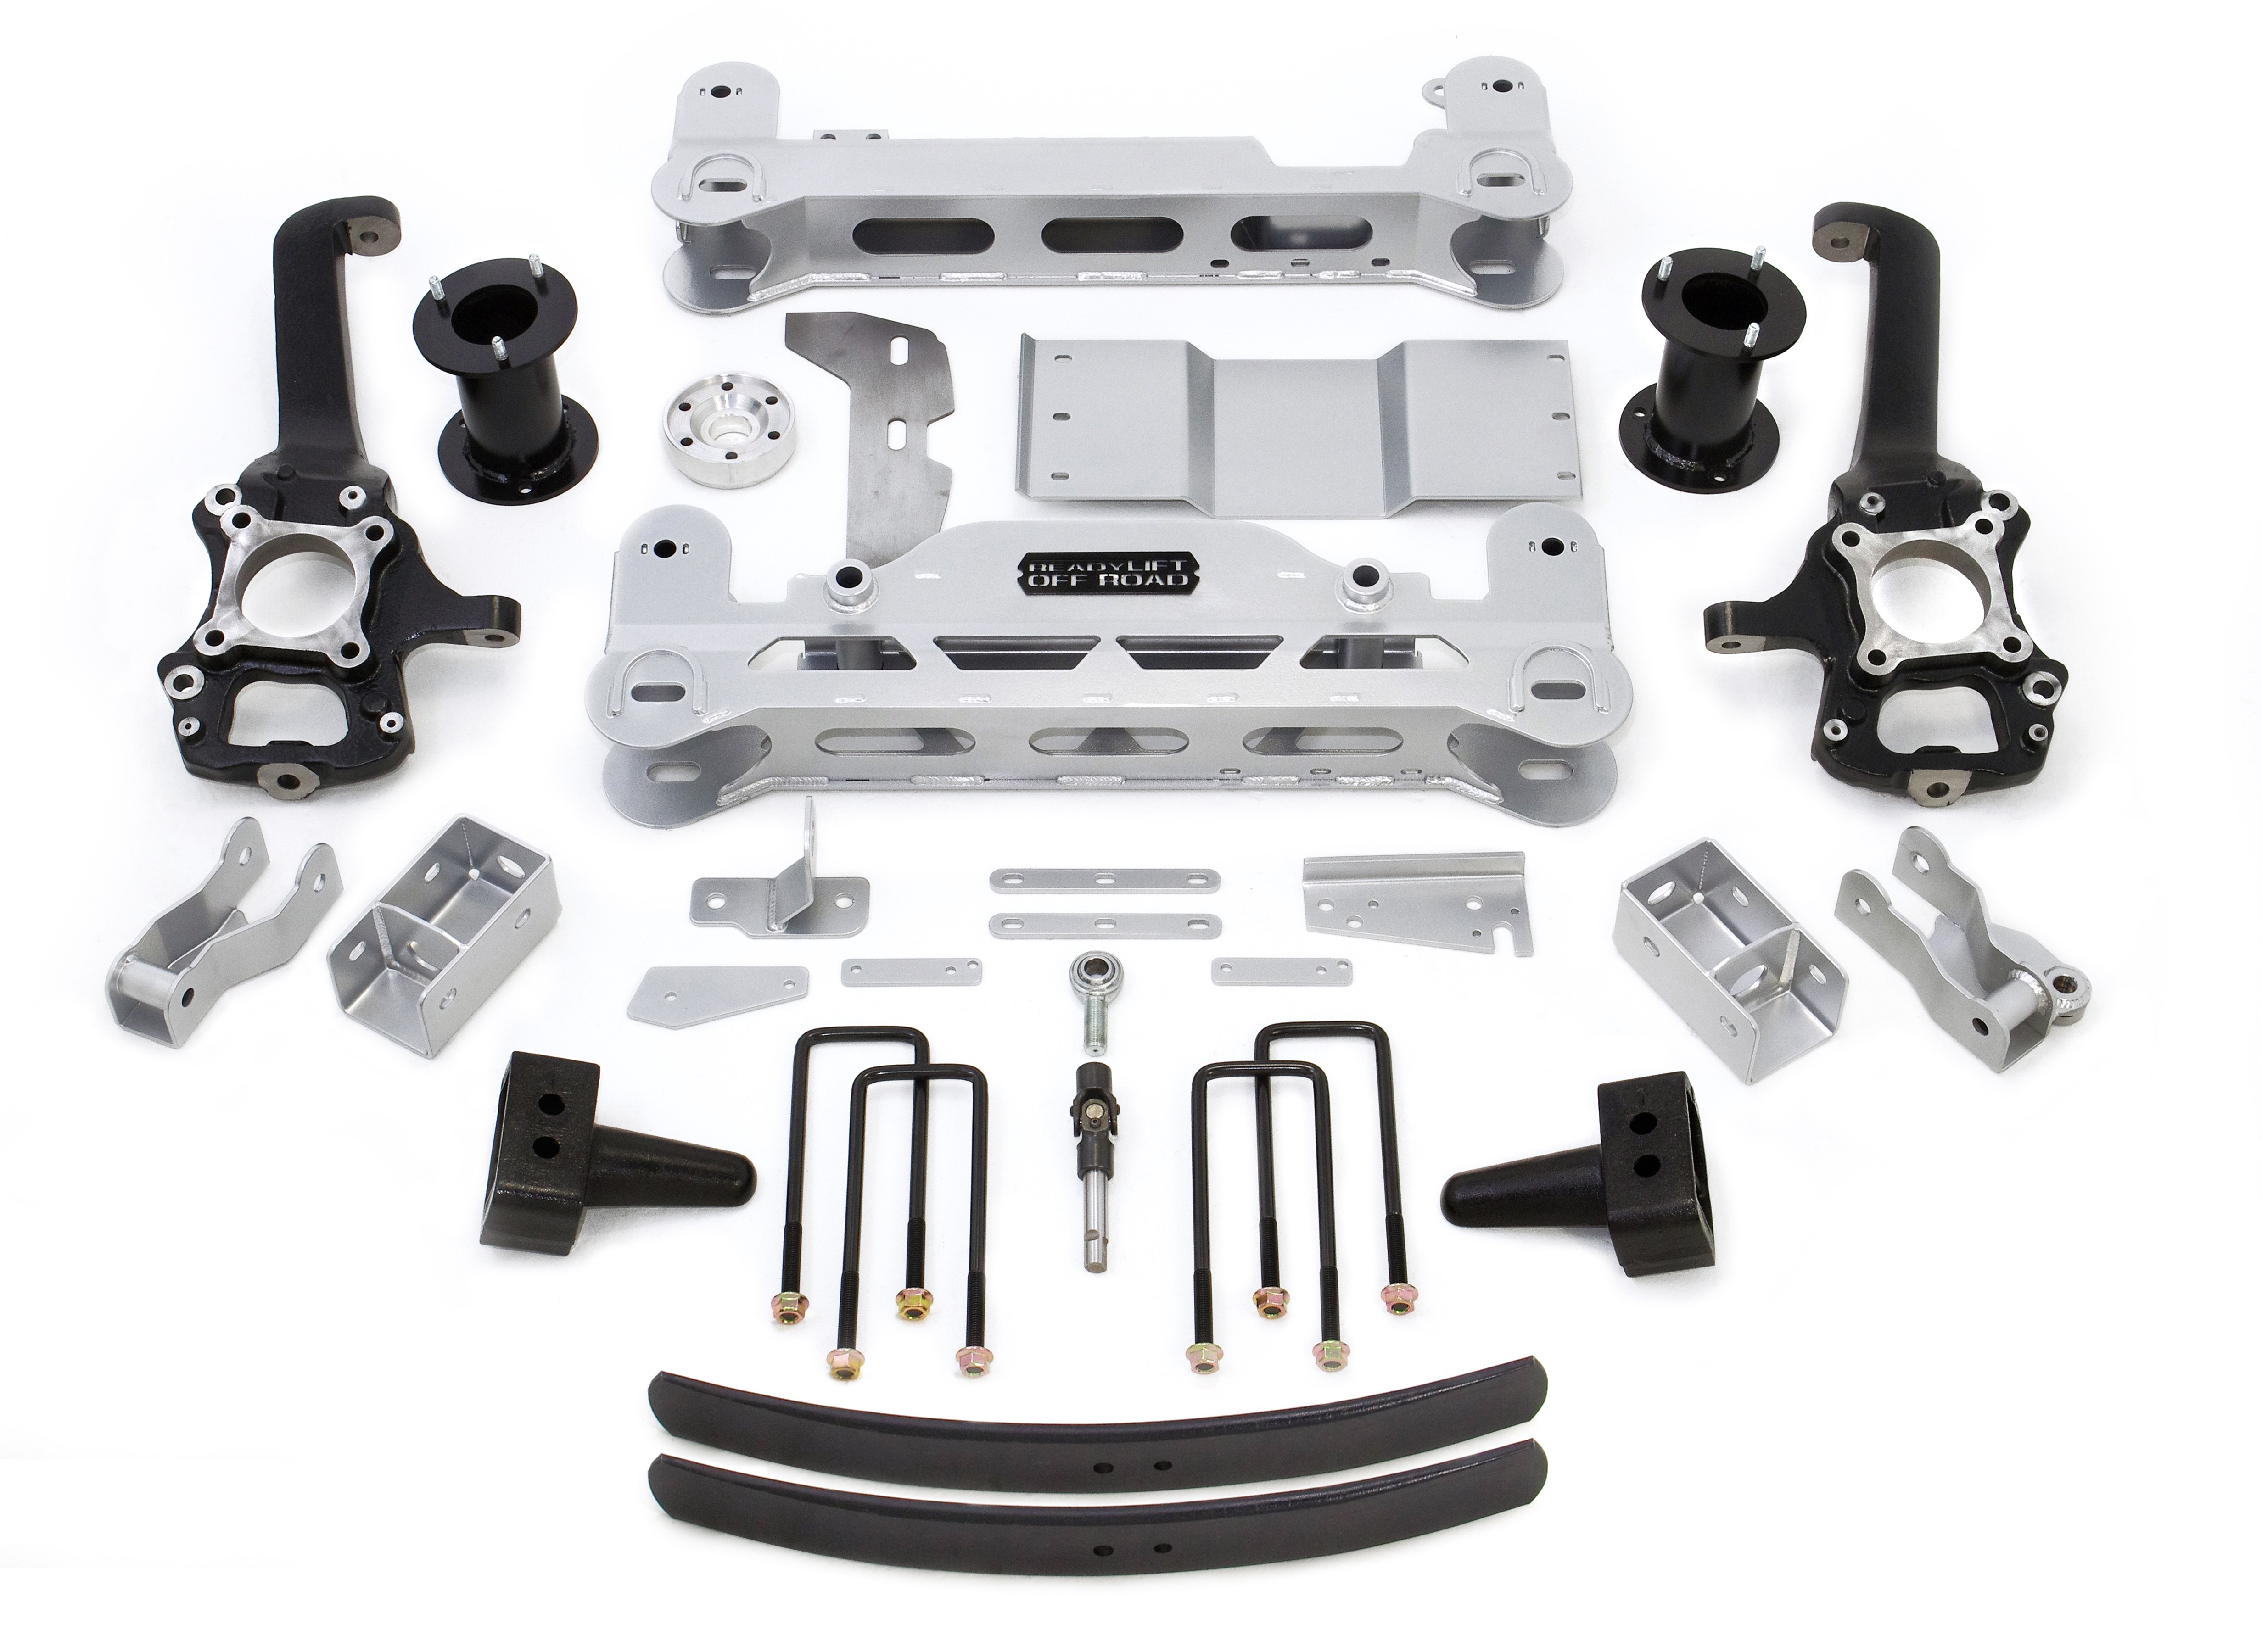 ReadyLIFT Suspension Off-Road MLS Lift Kit for 2009-13 Ford F-150, 6" Front/3.5" Rear Lift